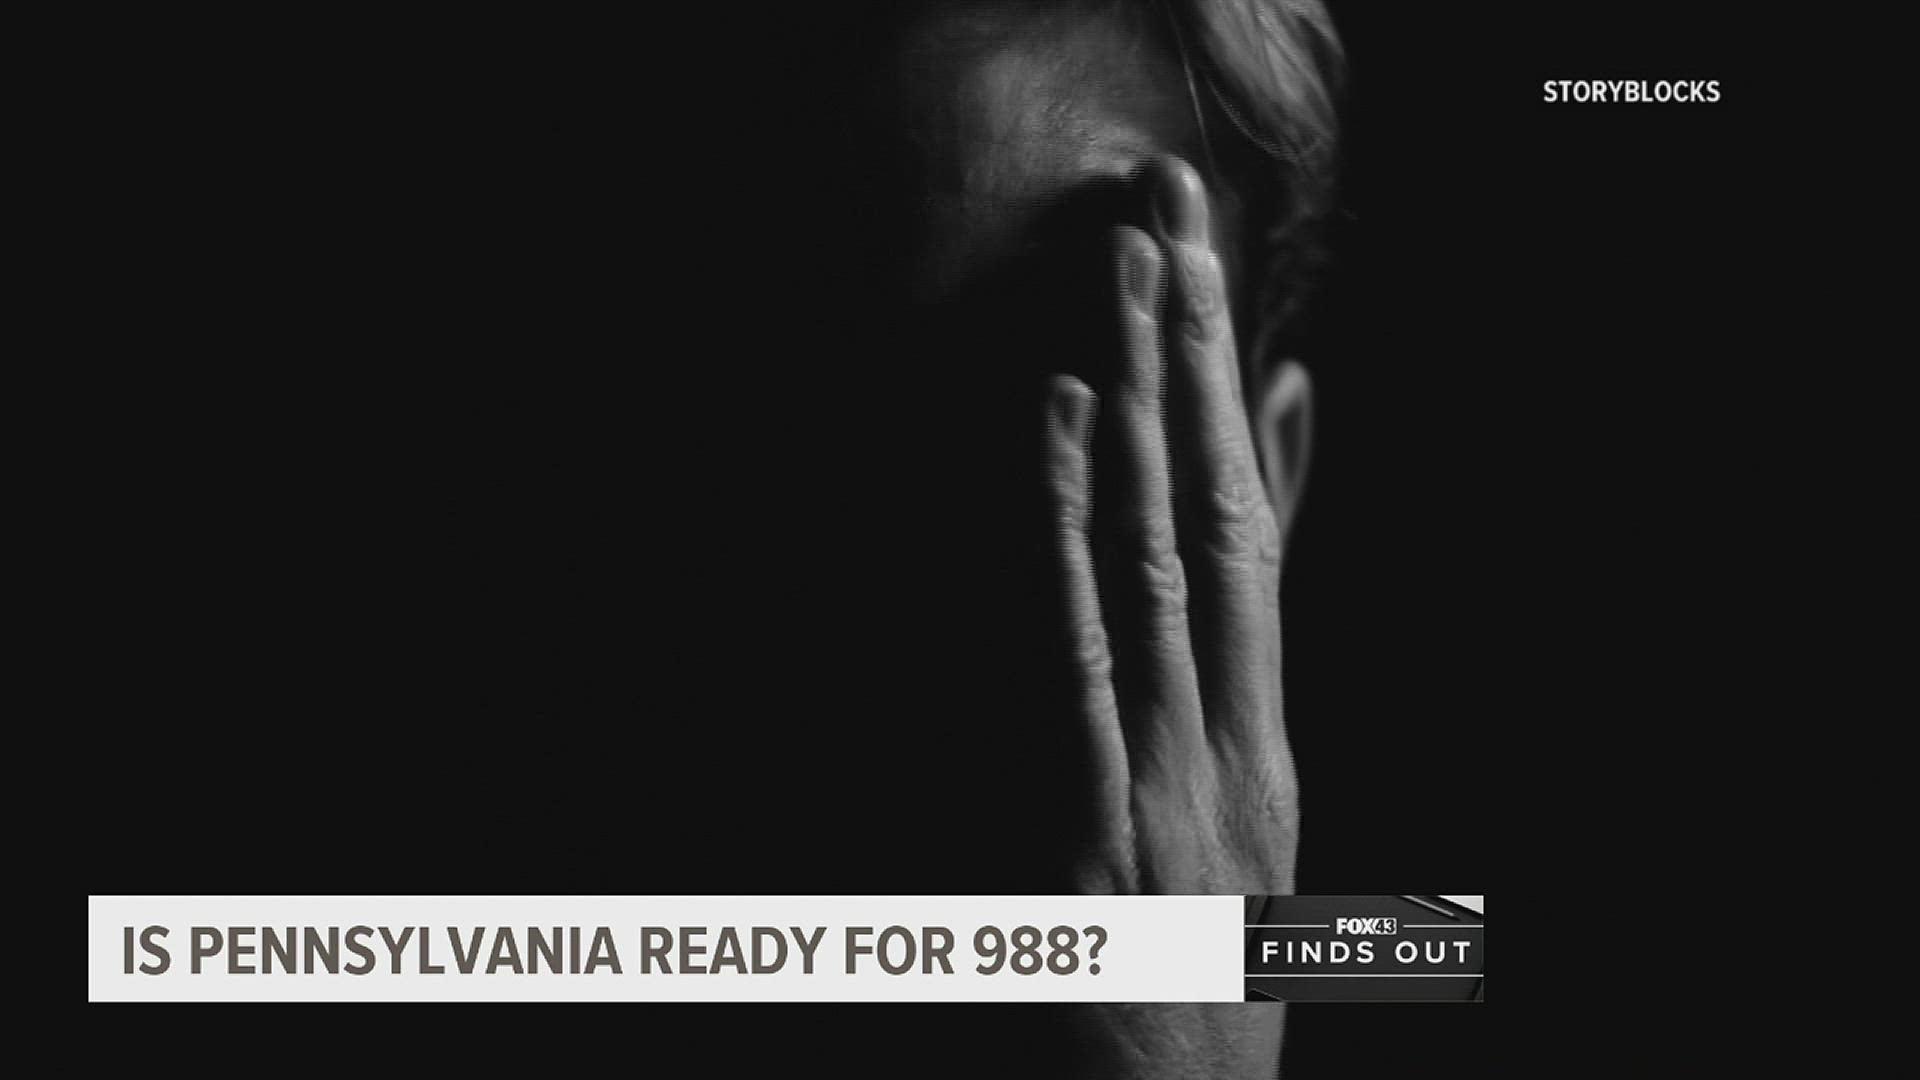 States are required to roll out the 988 number as the new suicide prevention lifeline phone number in July. FOX43 Finds Out if PA is really to make the new switch.